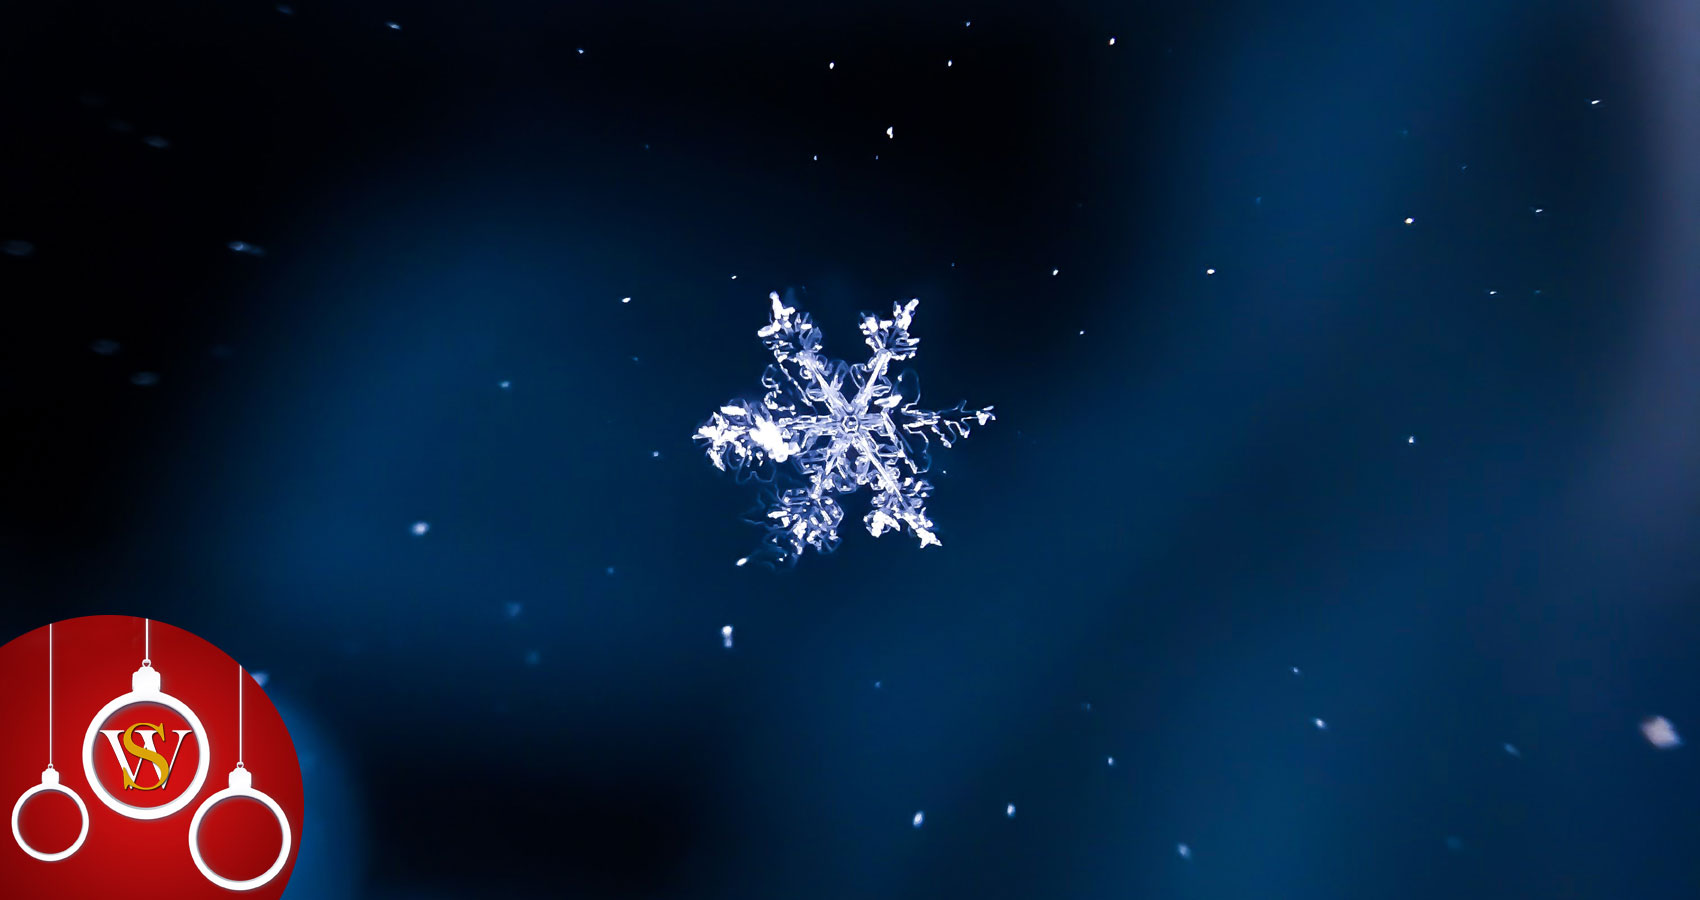 The Little Snowflake, a poem by Francesco Abate at Spillwords.com